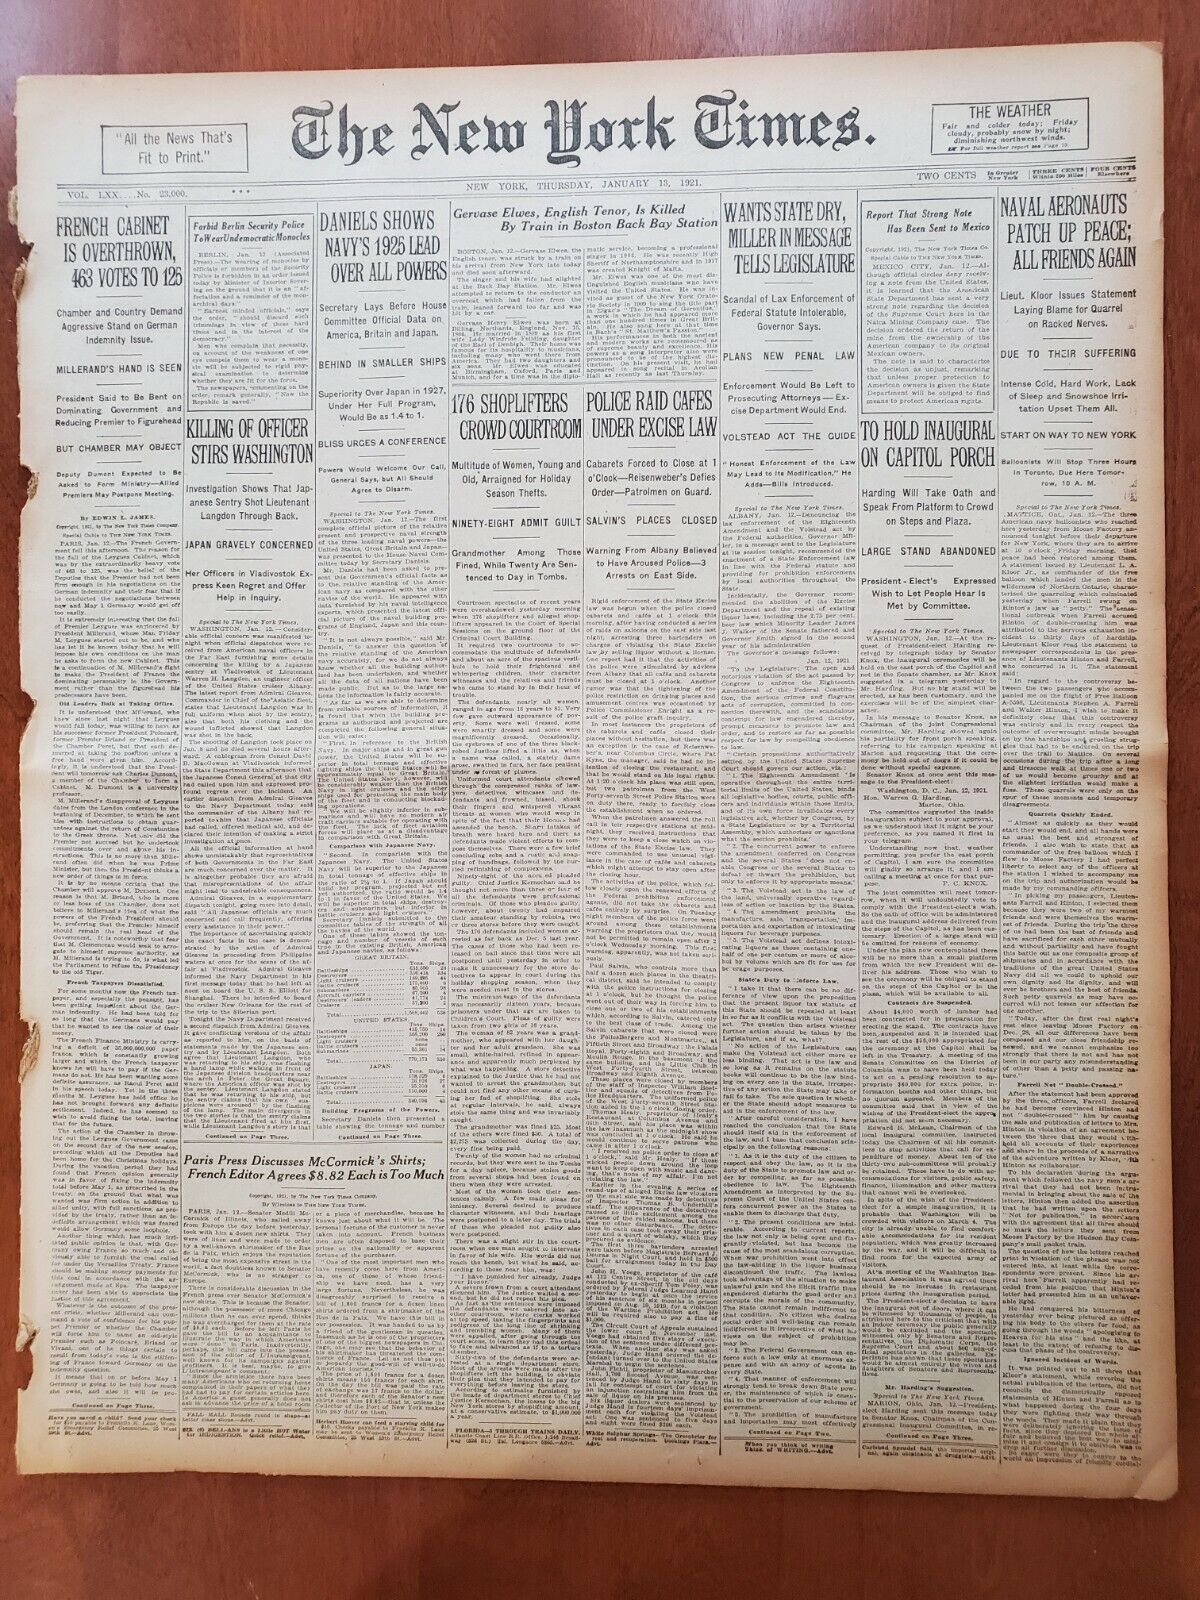 1921 JANUARY 13 NEW YORK TIMES-FRENCH CABINET OVERTHROWN 463 VOTES TO 125-NT809